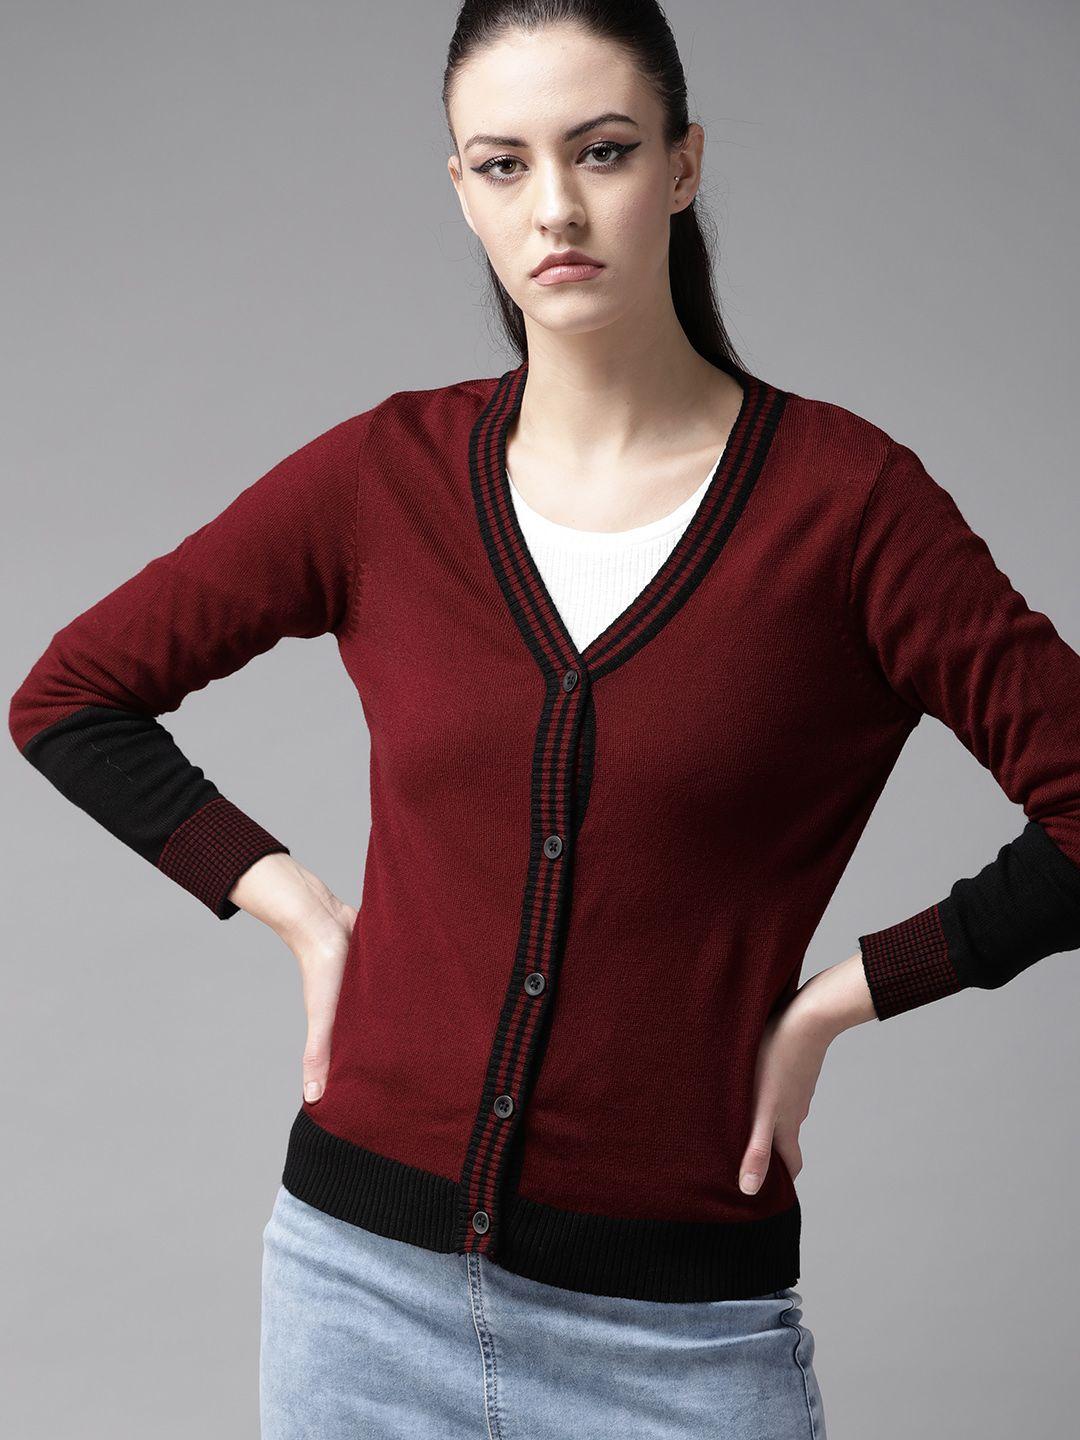 the-roadster-lifestyle-co-women-maroon-solid-cardigan